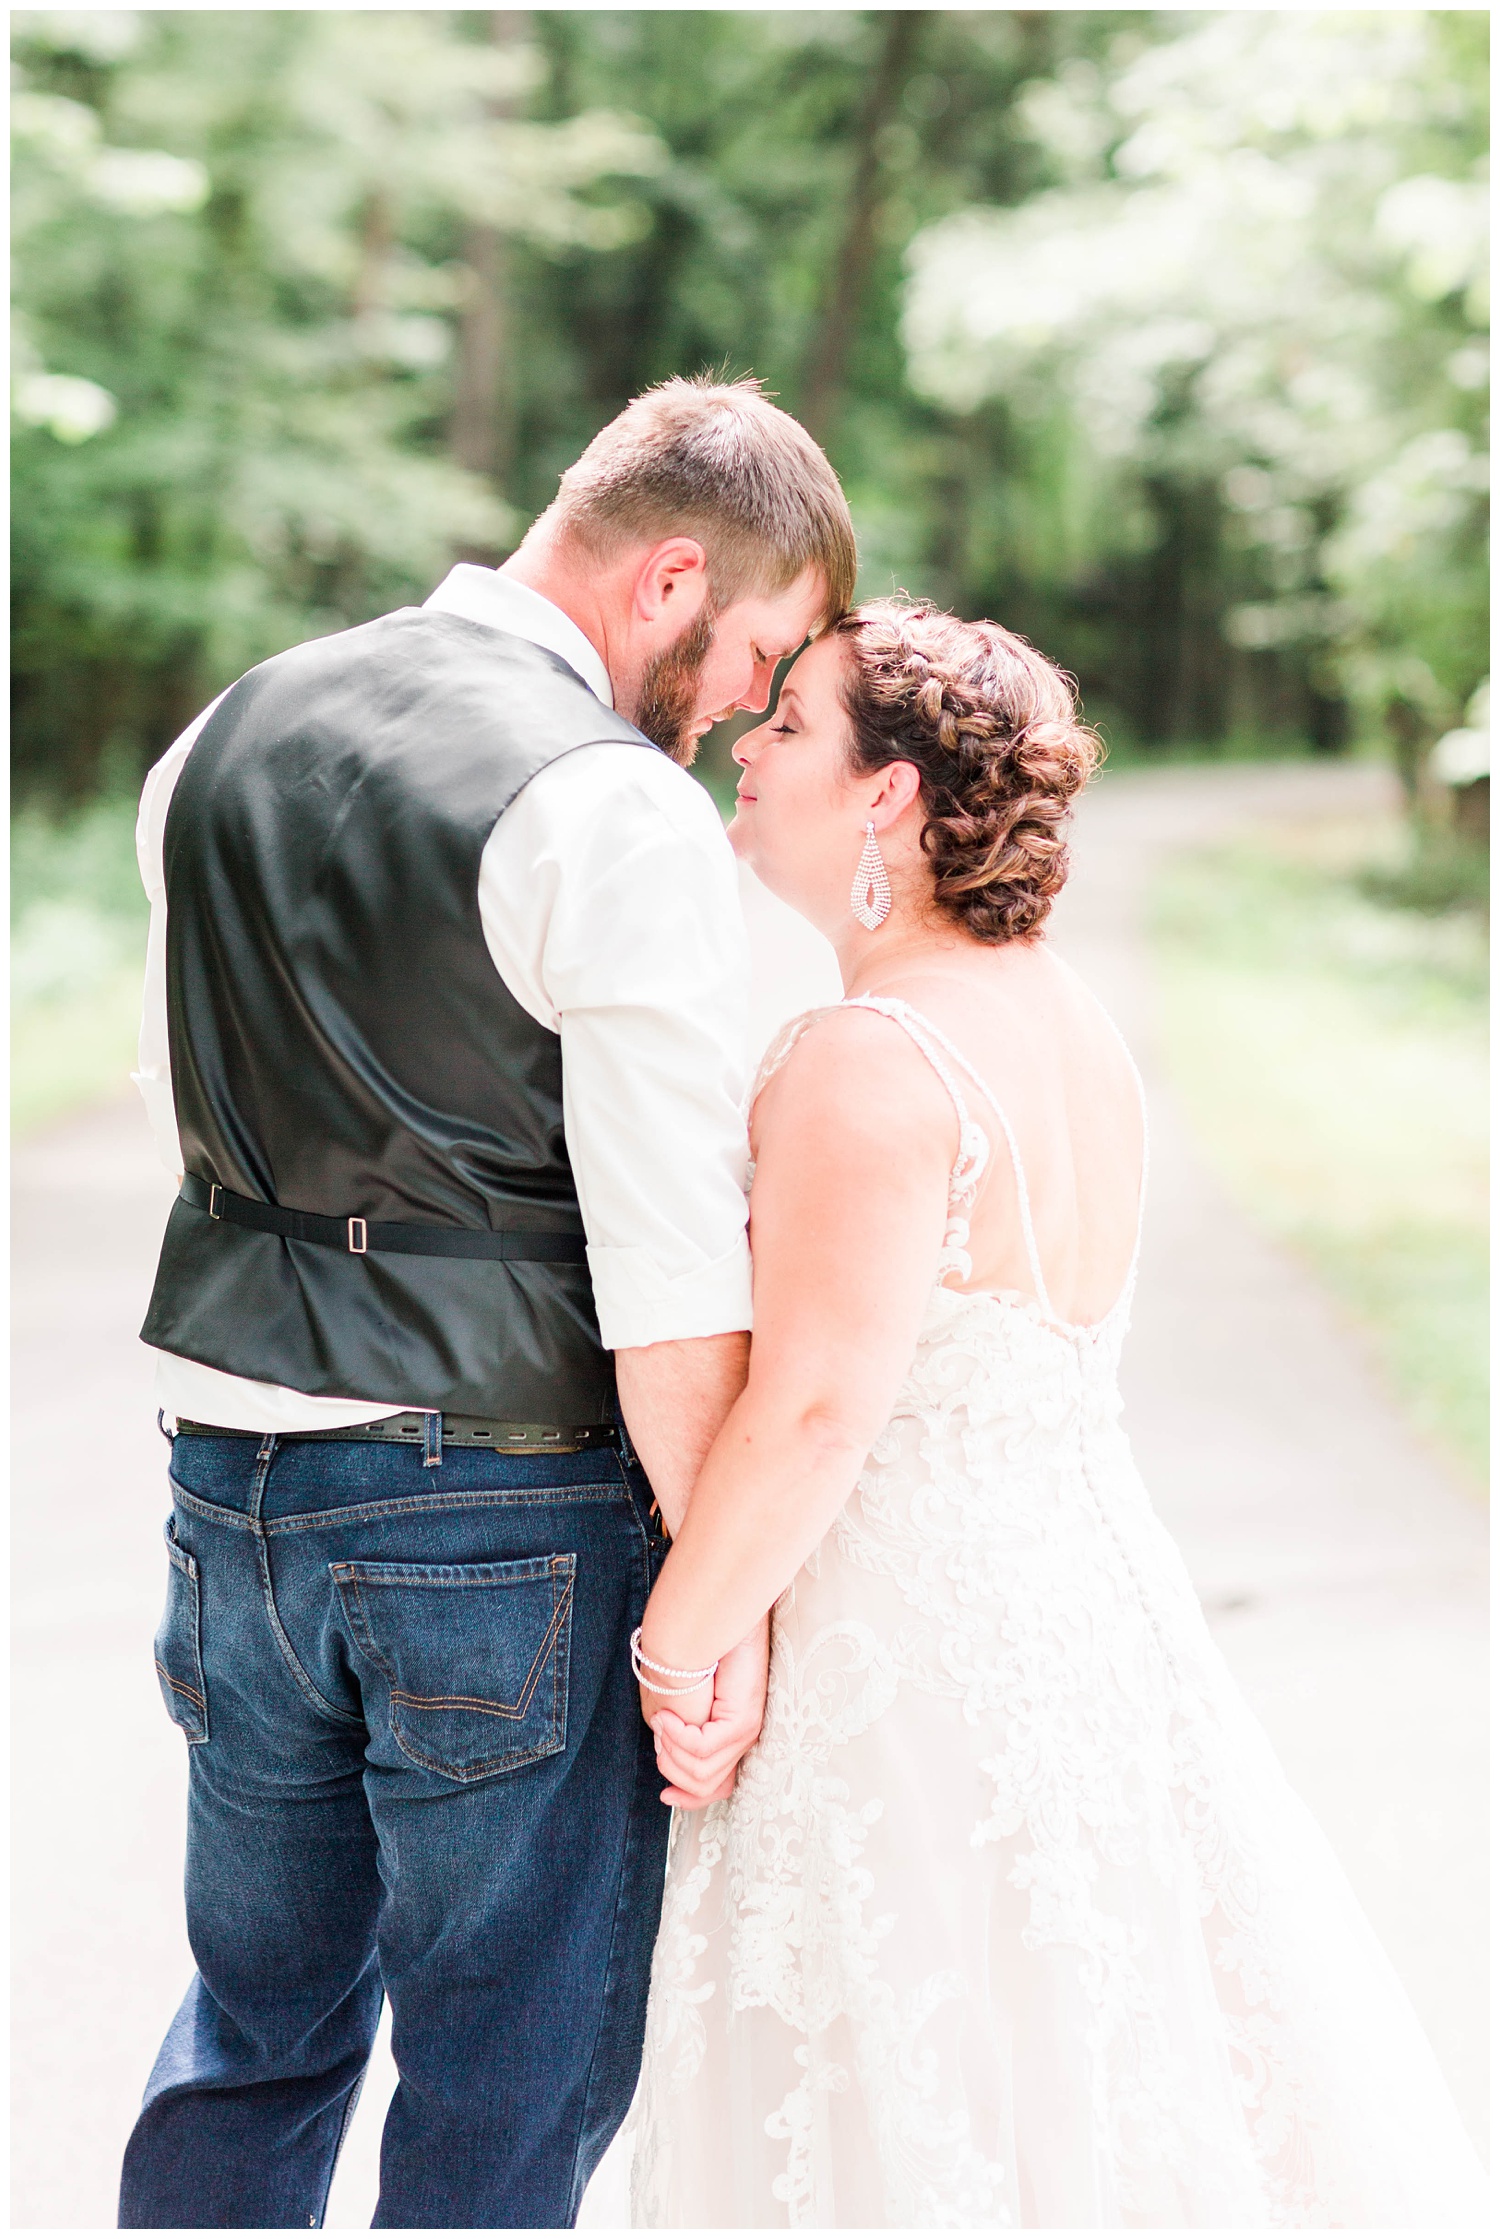 Bride and groom stand intimately close on a pathway in Call Park in Algona, Iowa | CB Studio